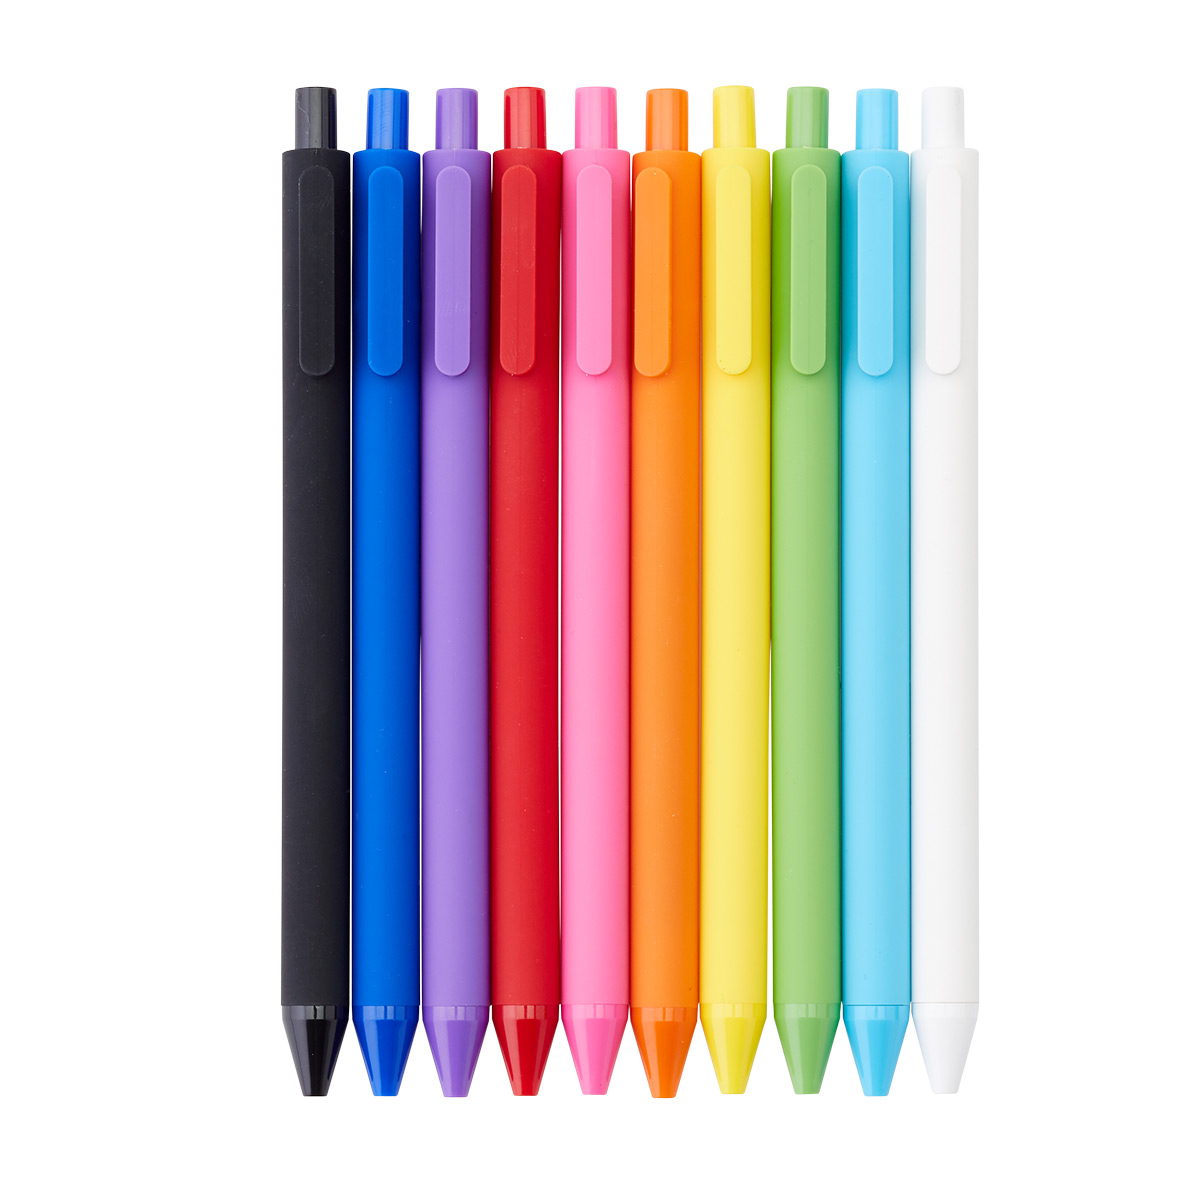 https://www.containerstore.com/catalogimages/358299/10077165-colored-gel-pens.jpg